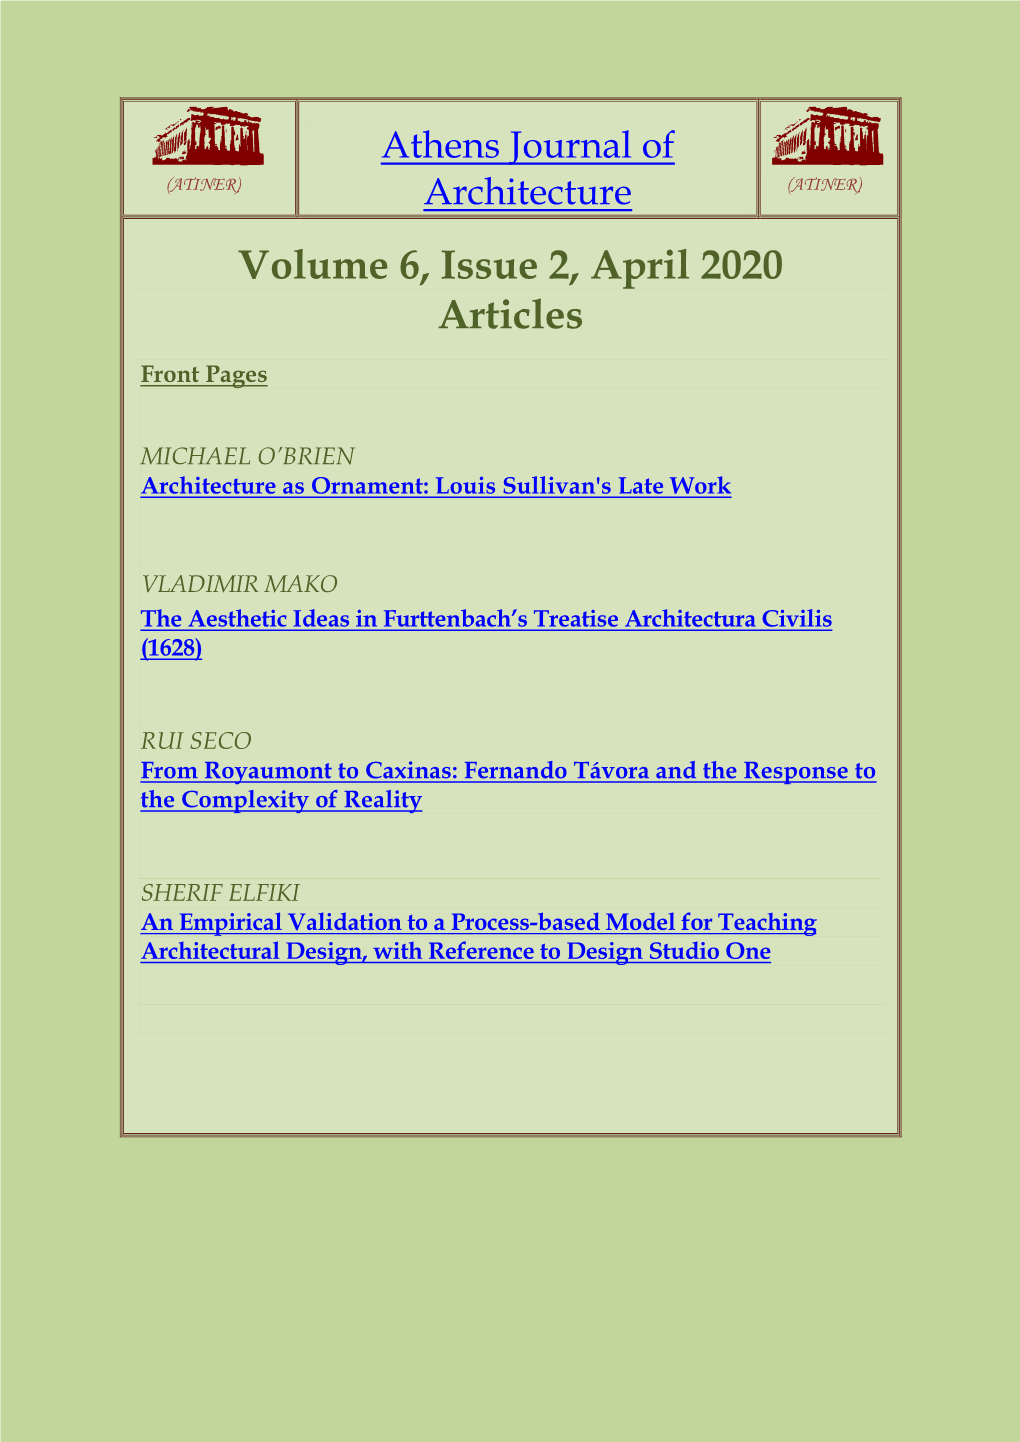 Volume 6, Issue 2, April 2020 Articles